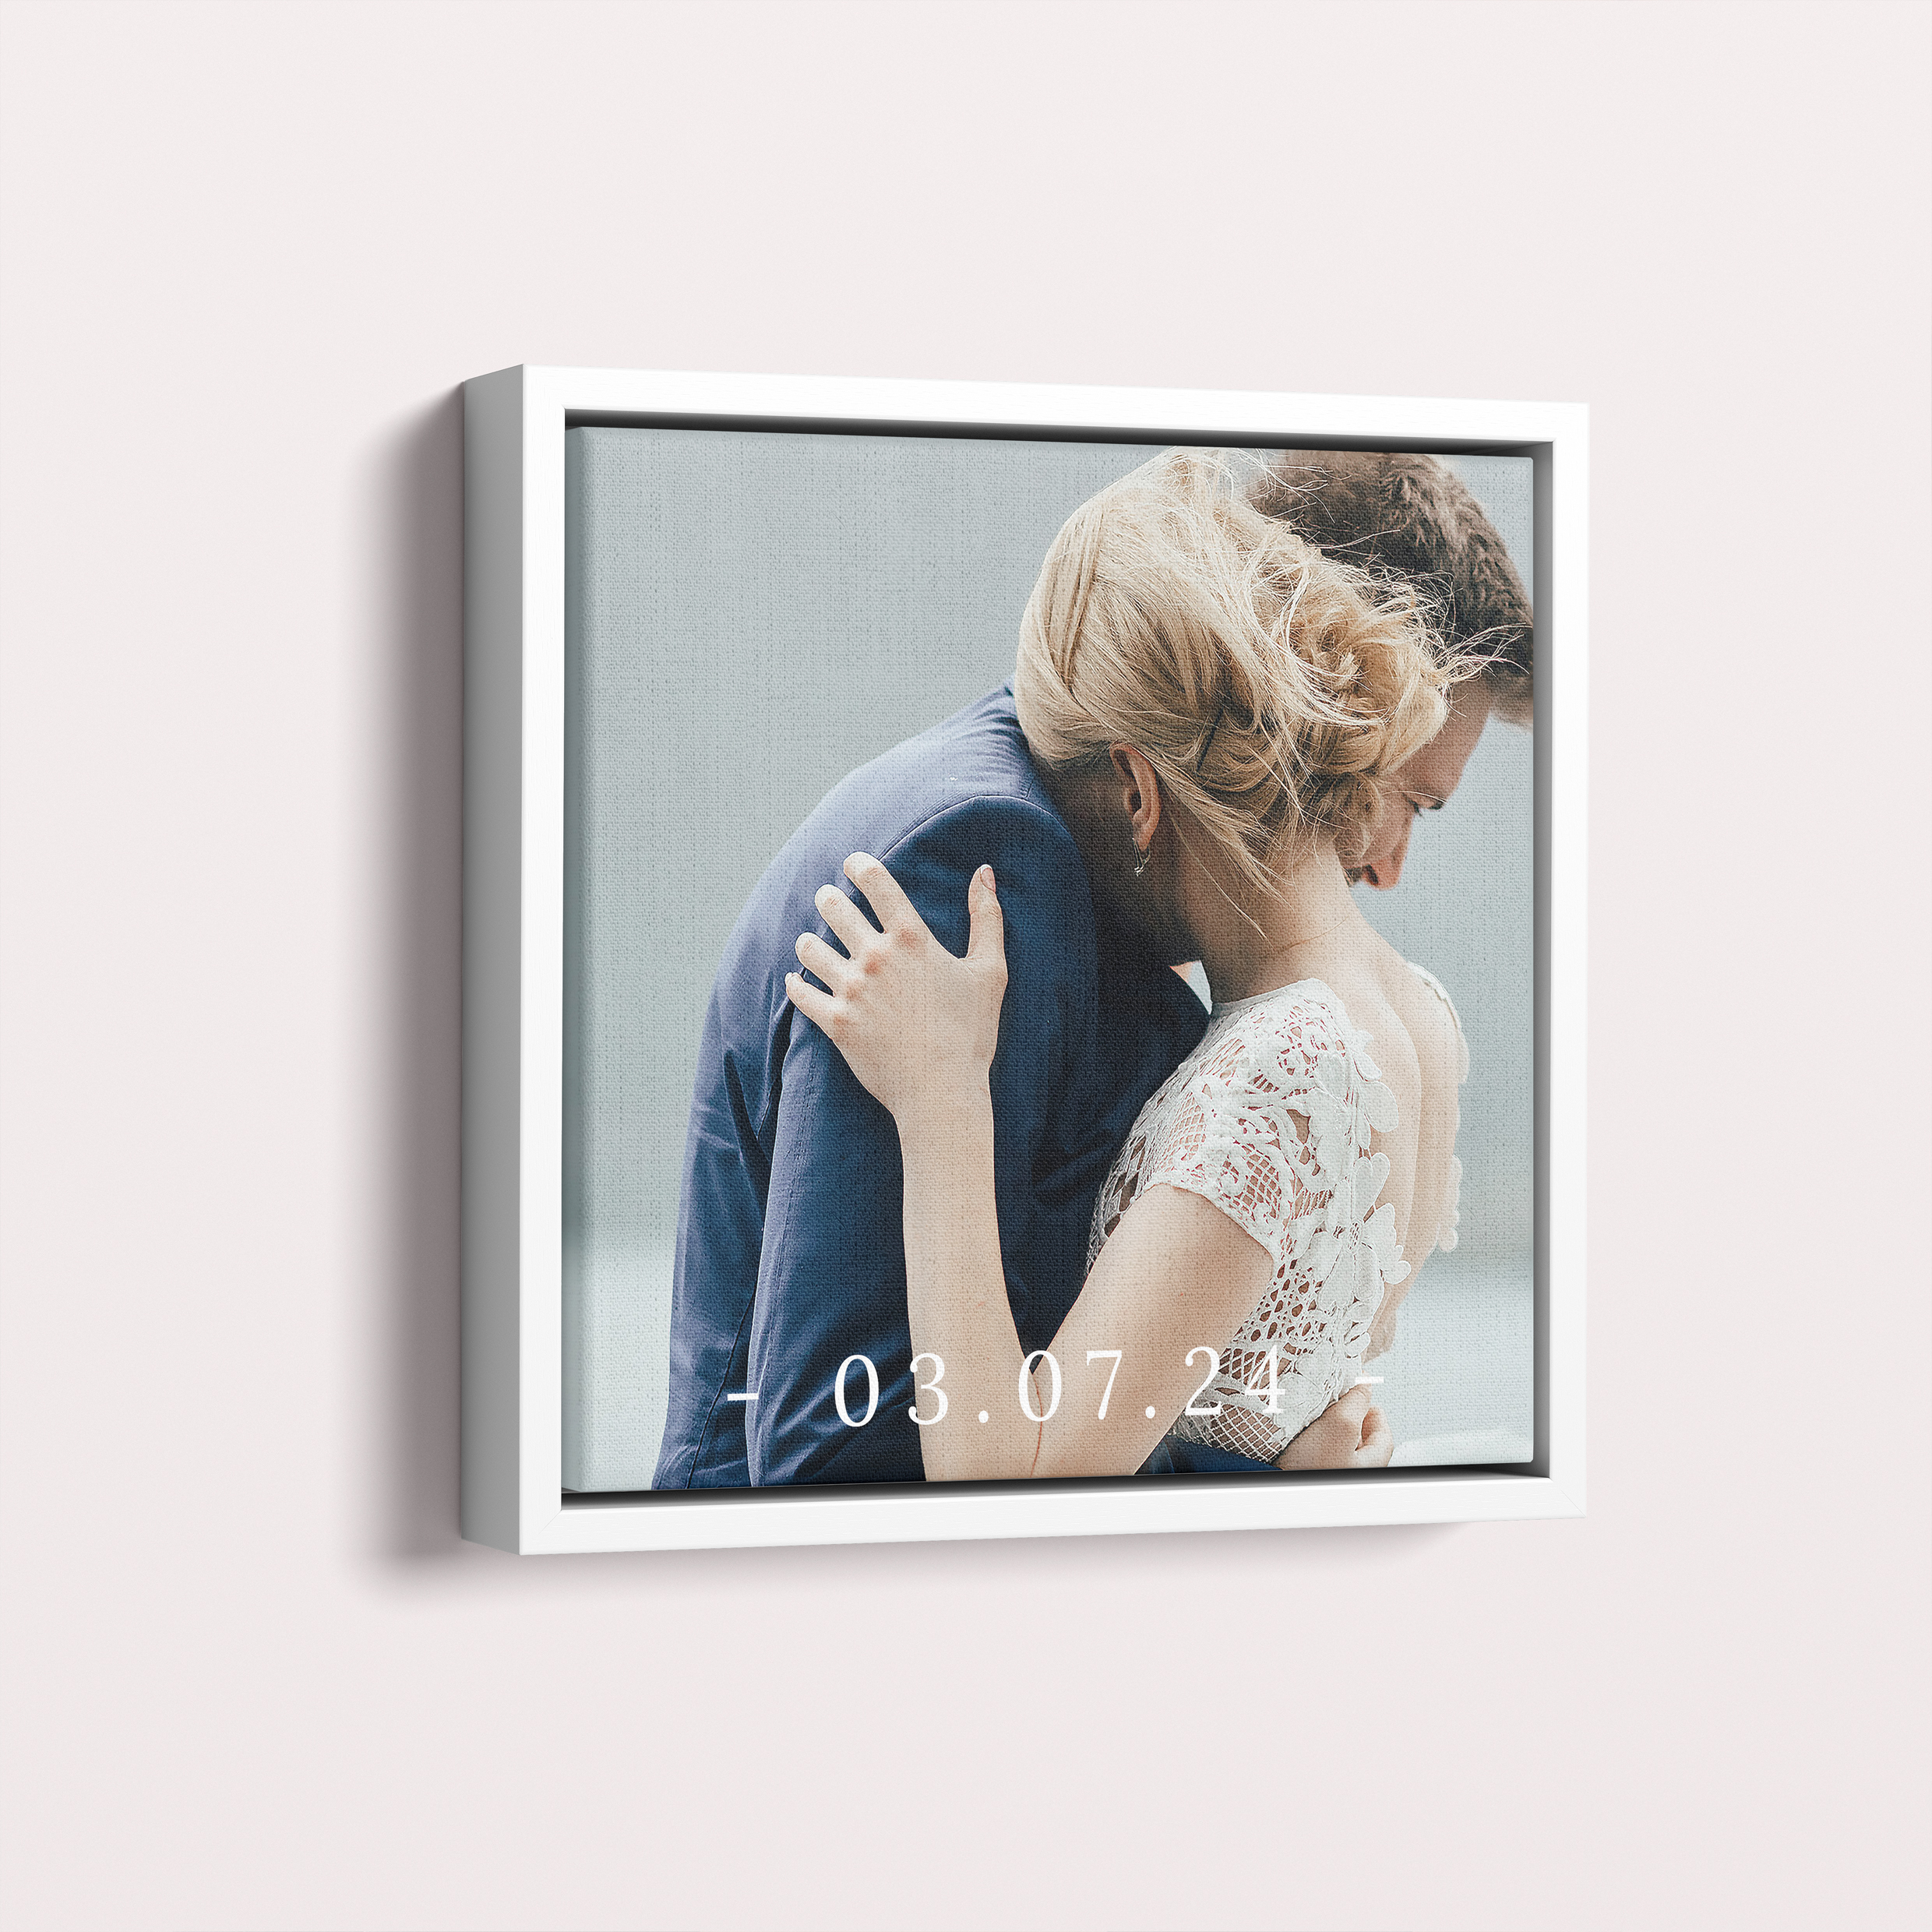 Date Stamp Framed Photo Canvas - Immortalize Memories with One Special Photo